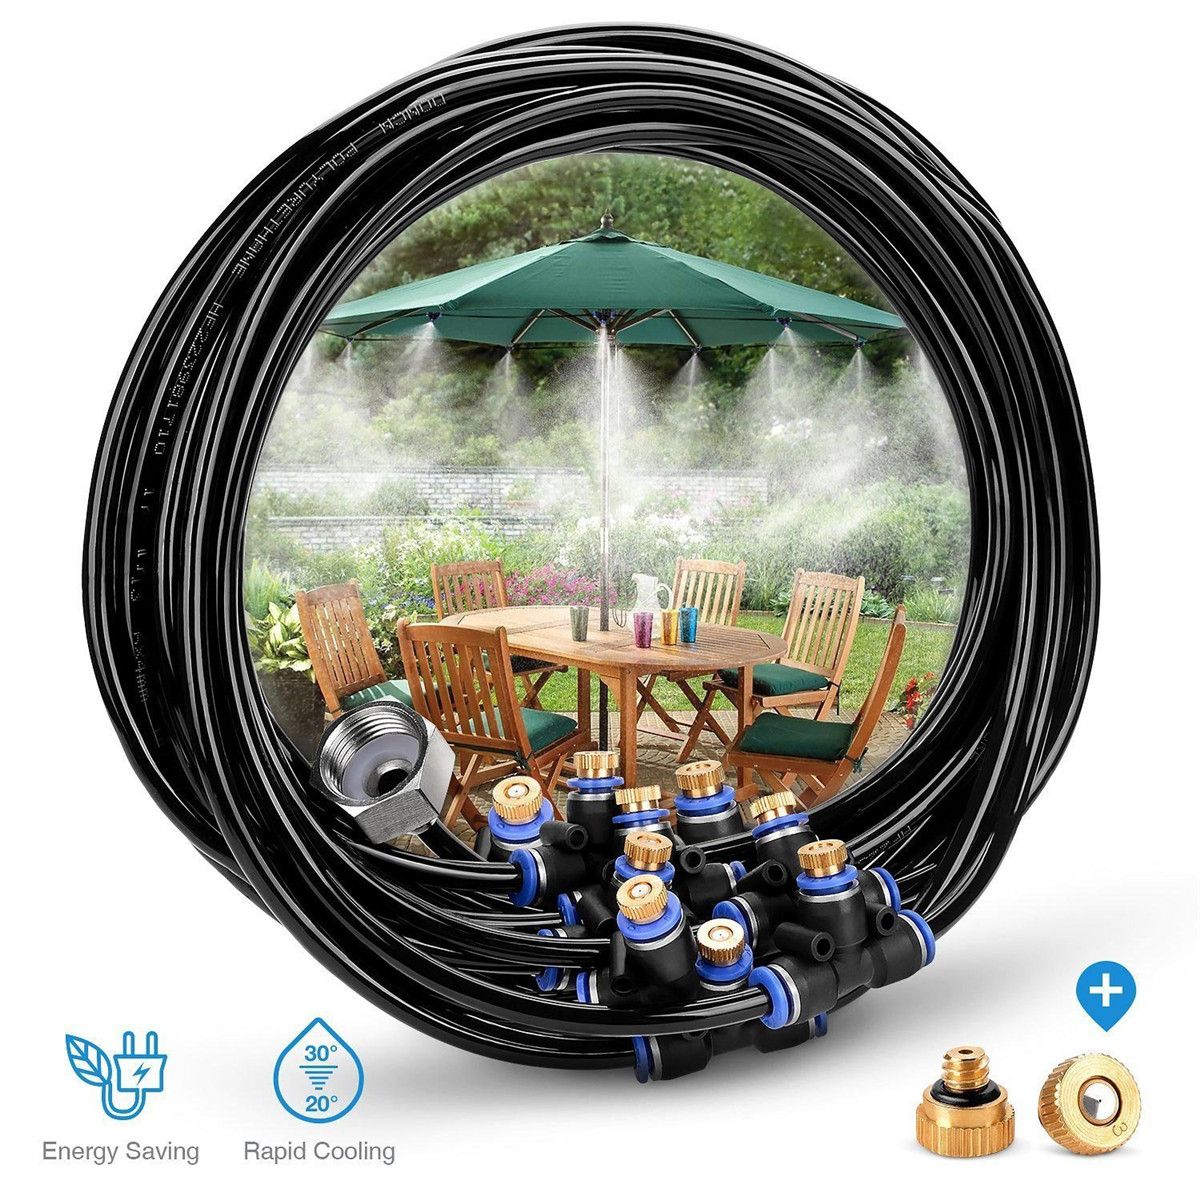 18M3M-Outdoor-Mist-Coolant-System-Water-Sprinkler-Garden-Patio-Mister-Cooling-Spray-Kits-Micro-Irrig-1527363